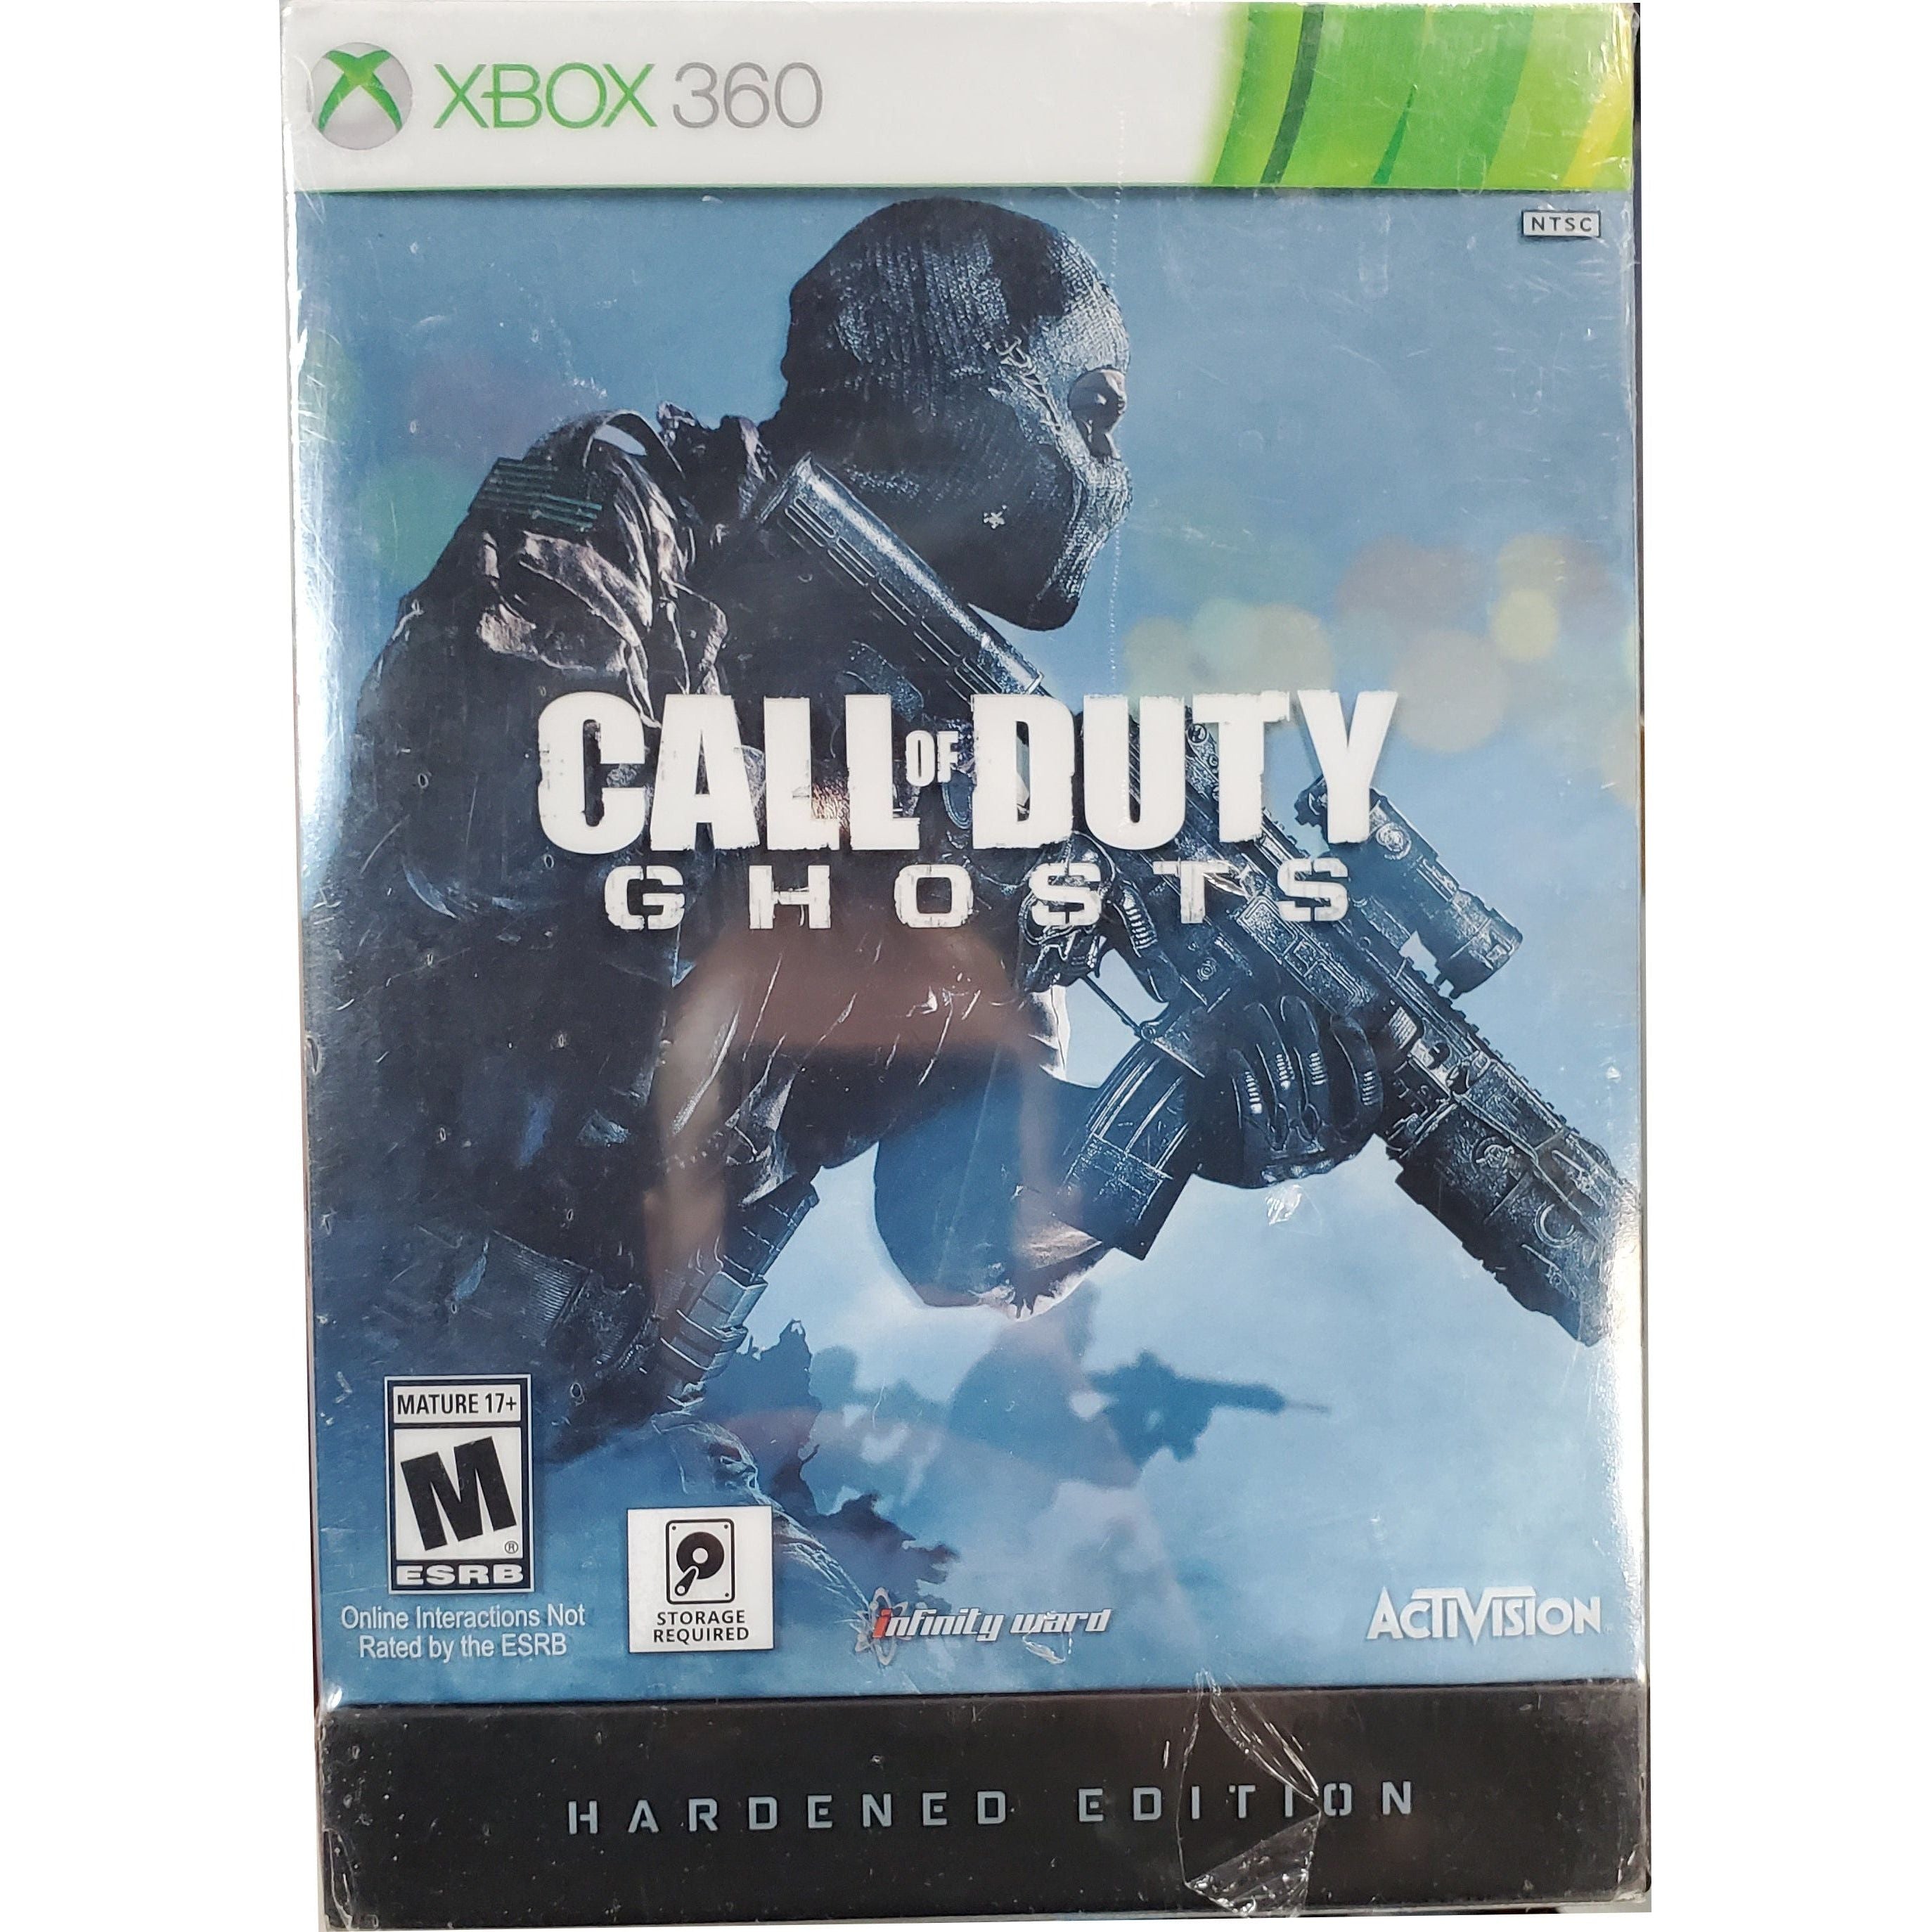 XBOX 360 - Call of Duty Ghosts Hardened Edition (Sealed)